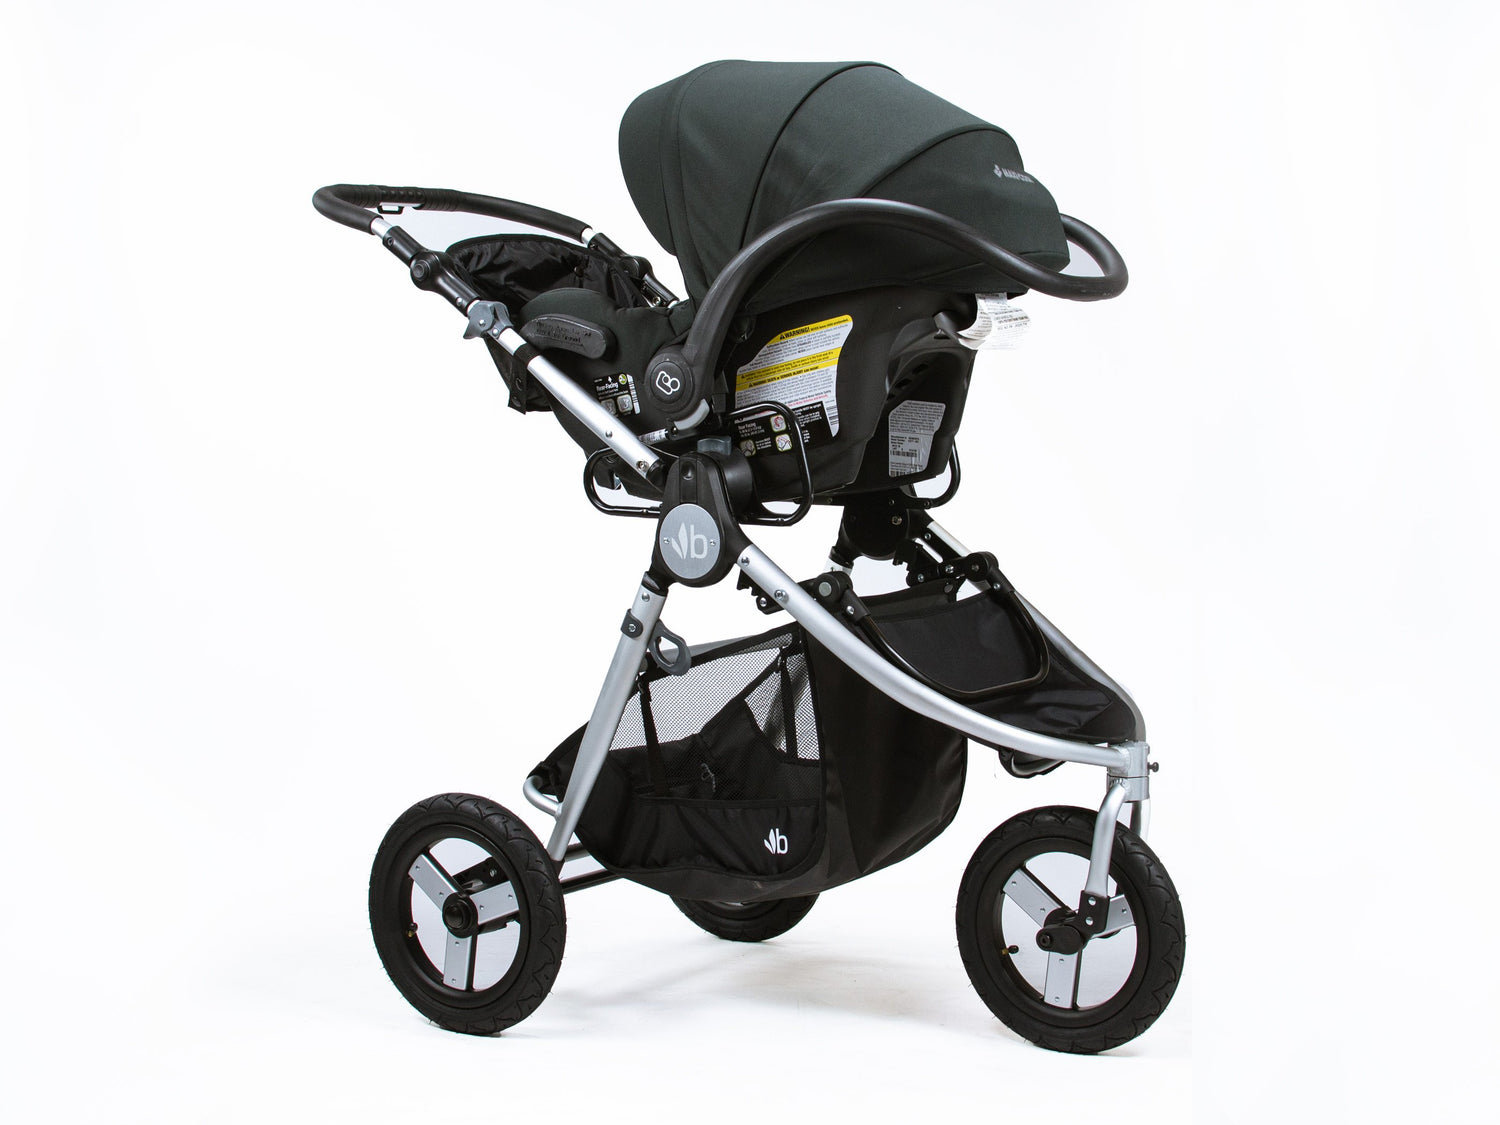 maxi cosi car seat adapter for stroller